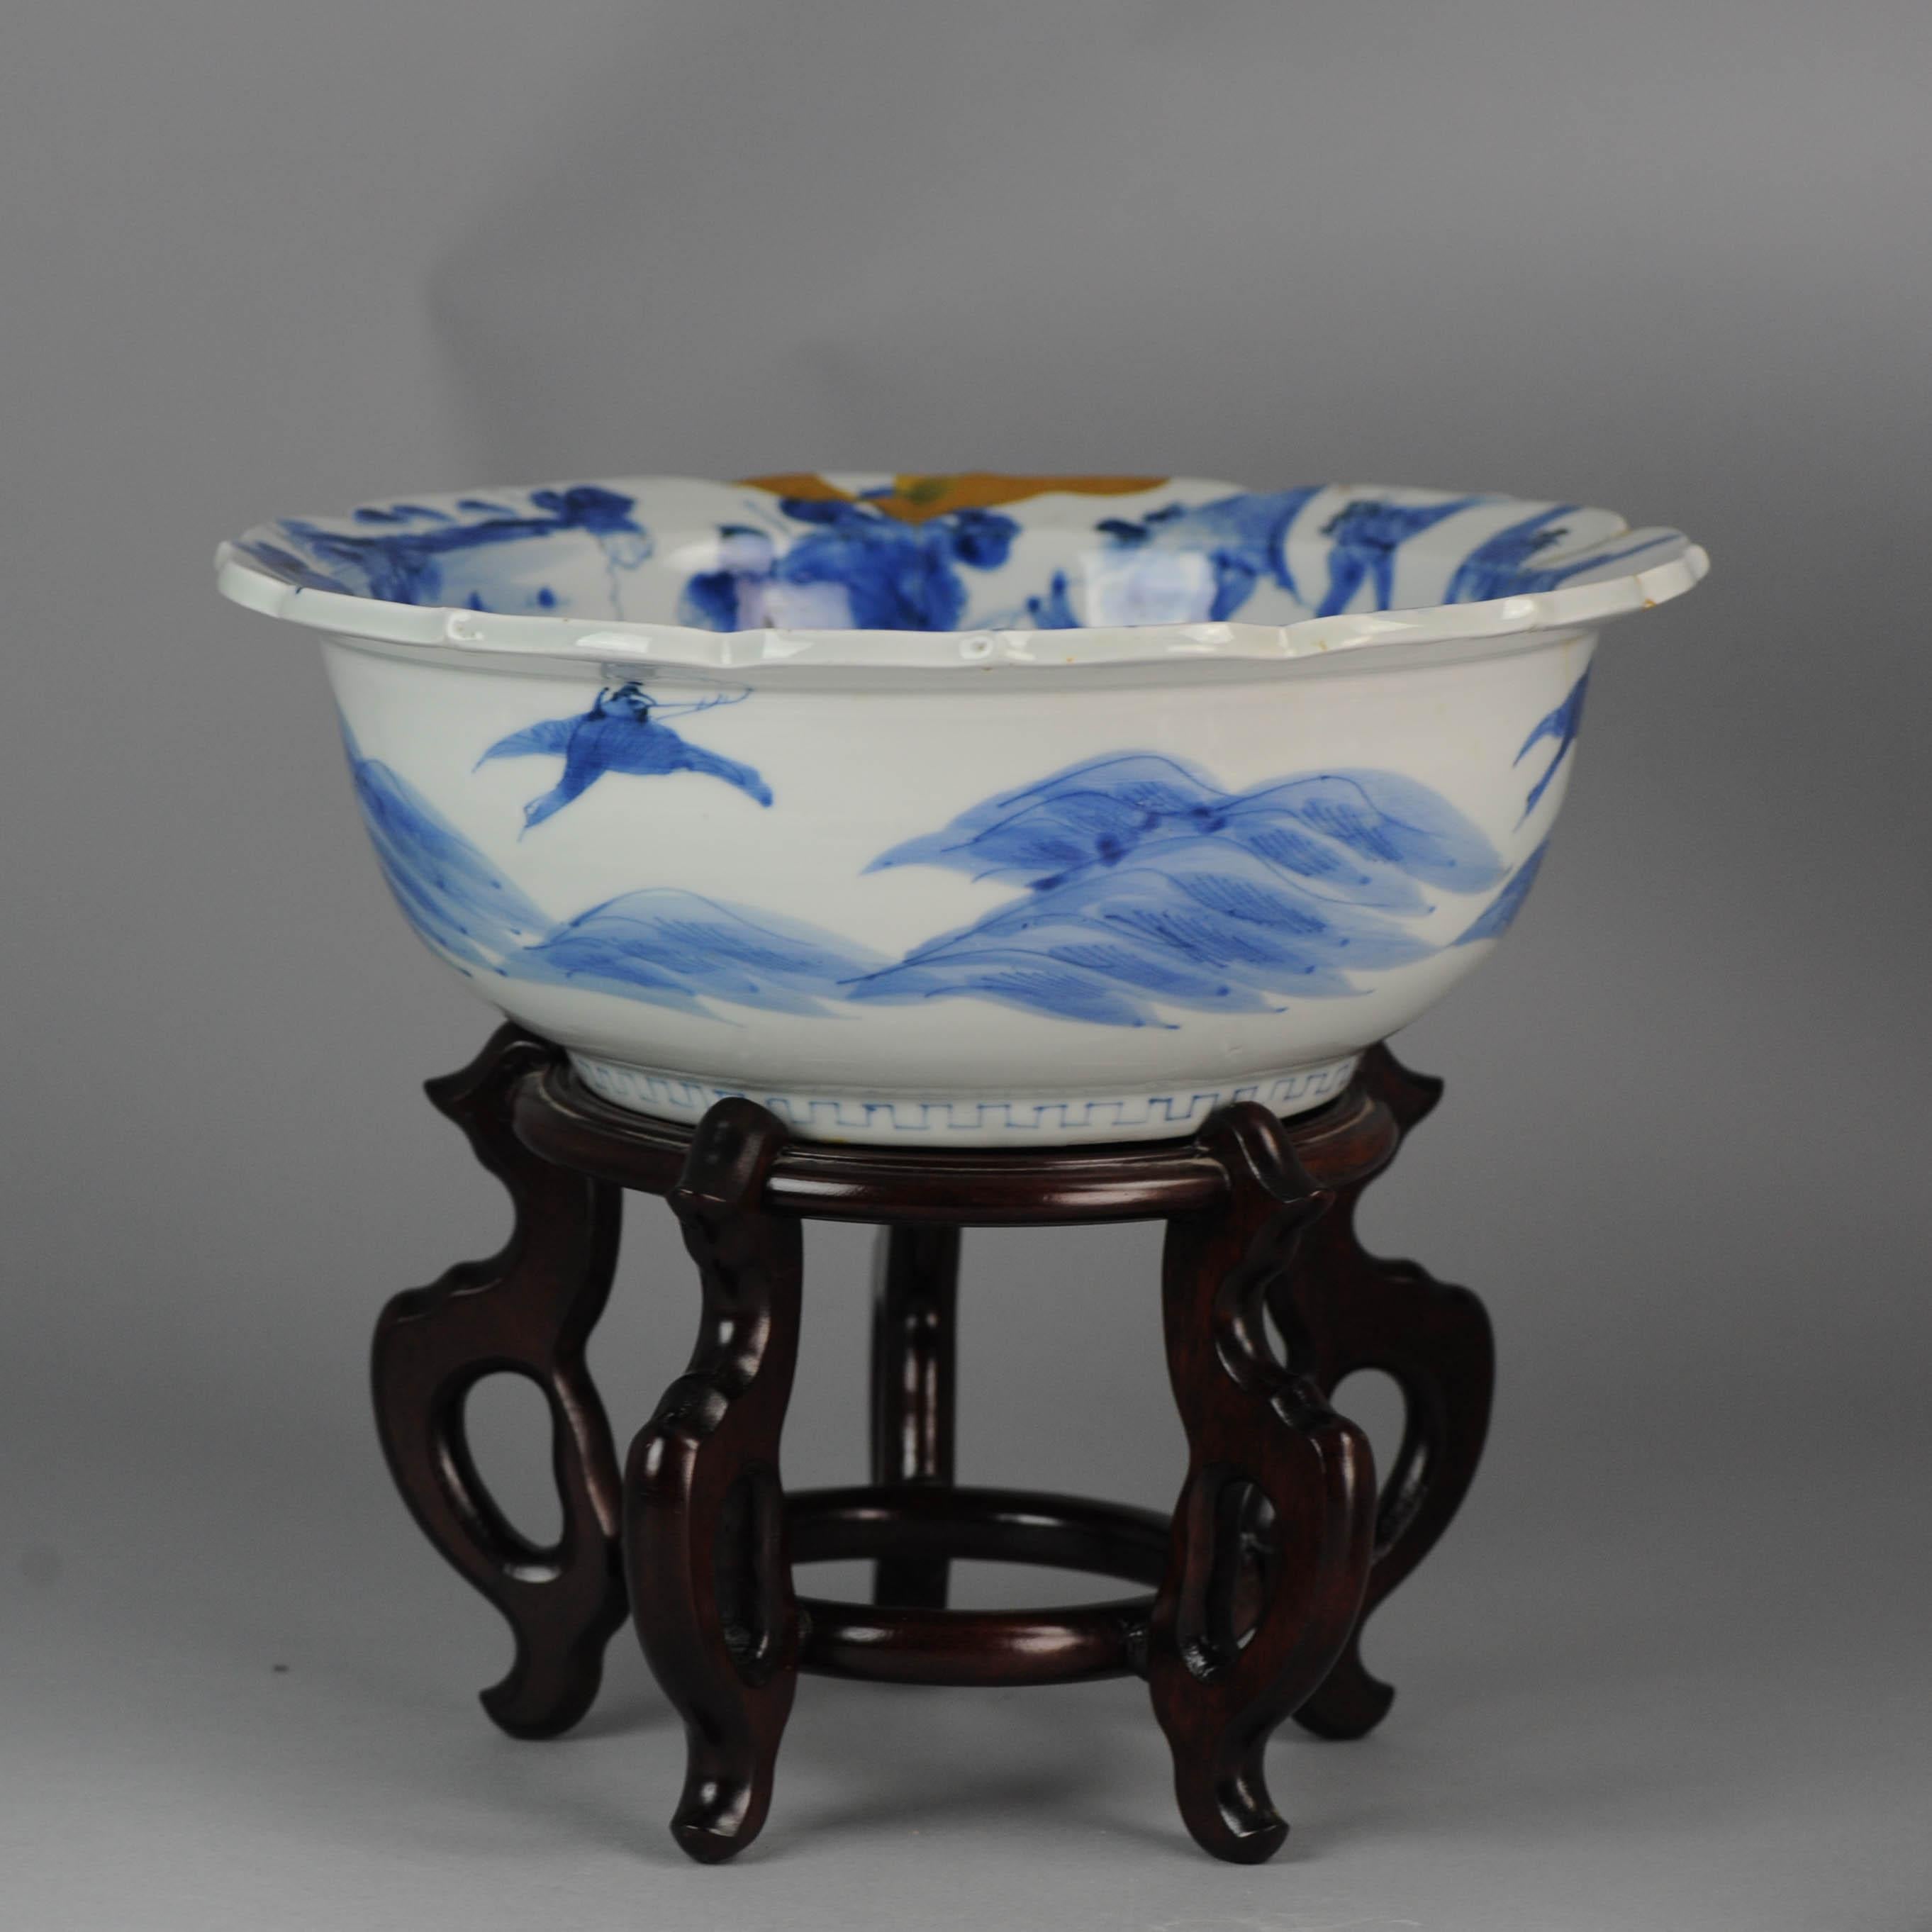 Lovely & Huge Japanese porcelain bowl/Basin. Lovely quality. Stand is Not included.

Additional information:
Material: Porcelain
Region of Origin: Japan
Period: 19th century
Condition: Stand not included, auctioned seperatly. Overall Condition D;